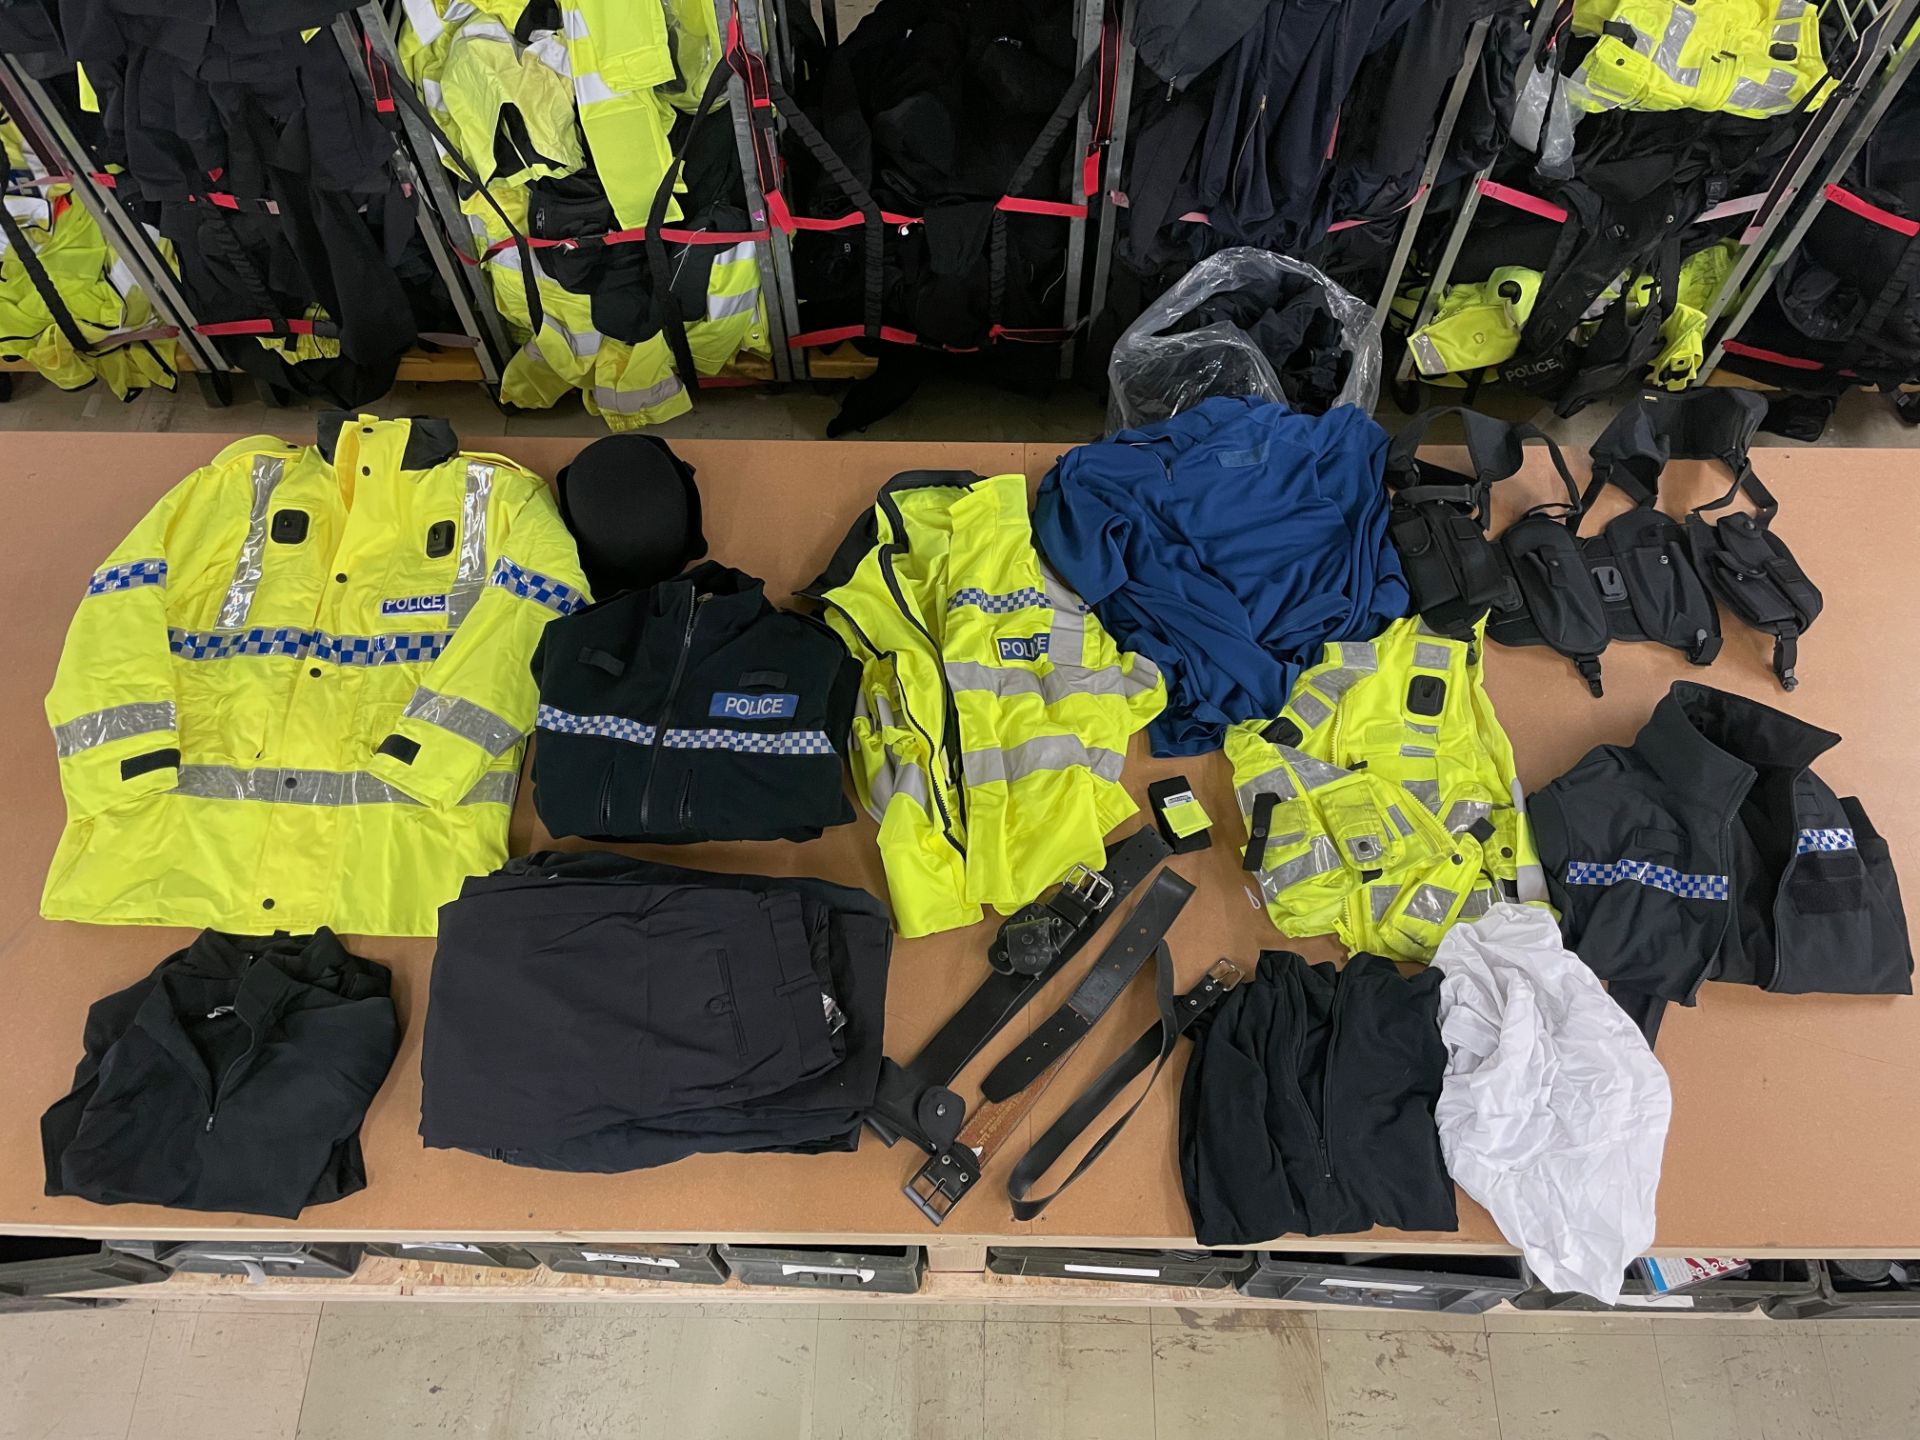 5 X BAGS EX POLICE CLOTHING & ACCESSORIES - RRP £1375.00 - Image 12 of 12